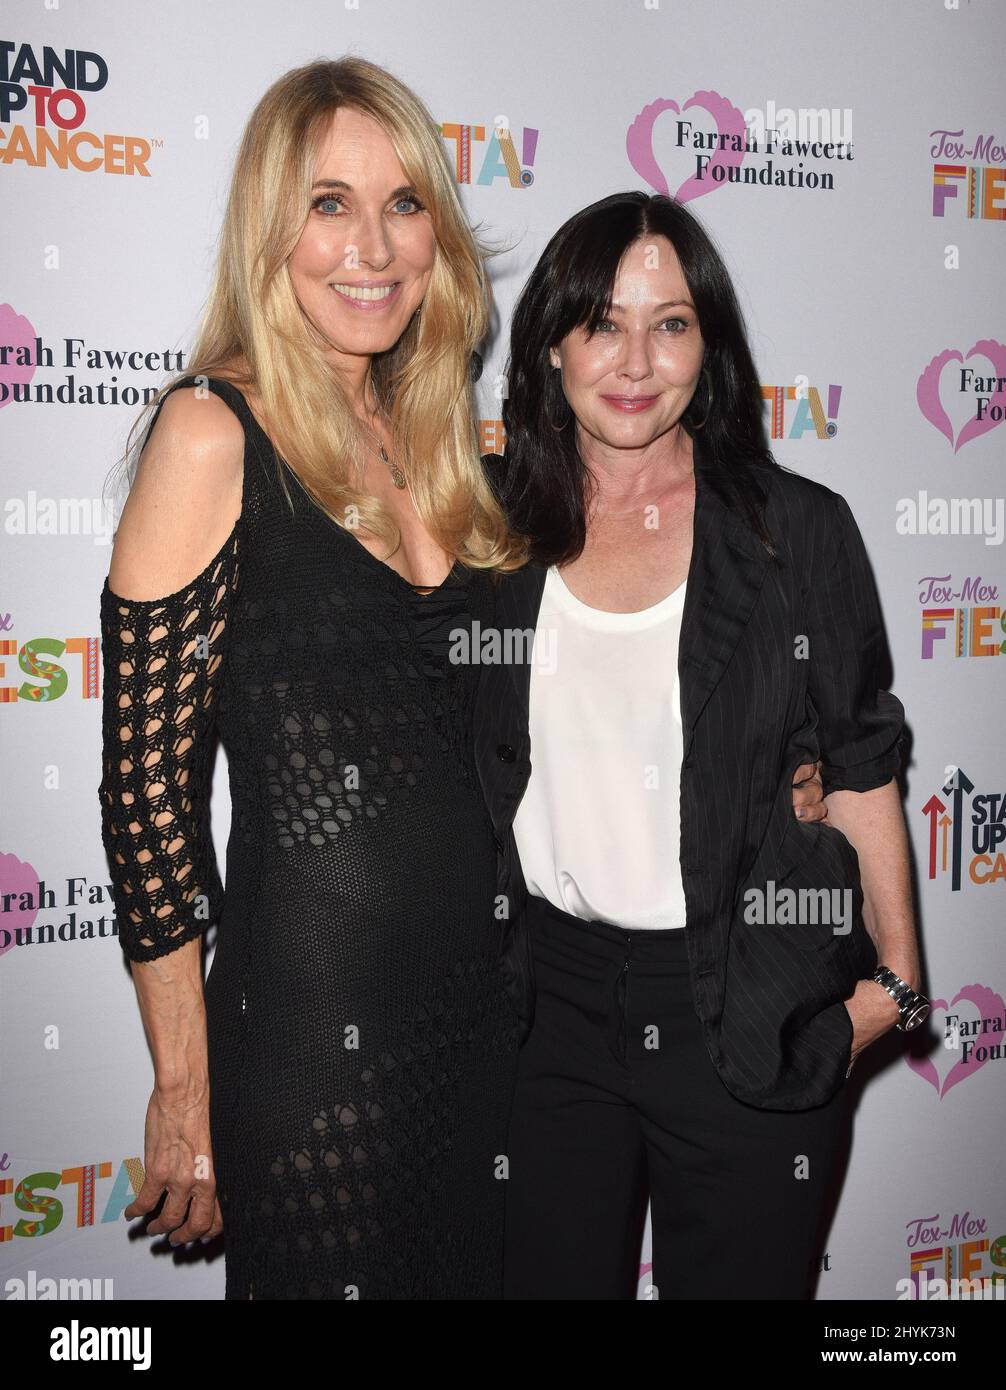 Alana Stewart and Shannen Doherty at The Farrah Fawcett Foundation's Tex-Mex Fiesta held at the Wallis Annenberg Center for the Performing Arts on September 6, 2019 in Beverly Hills, USA. Stock Photo